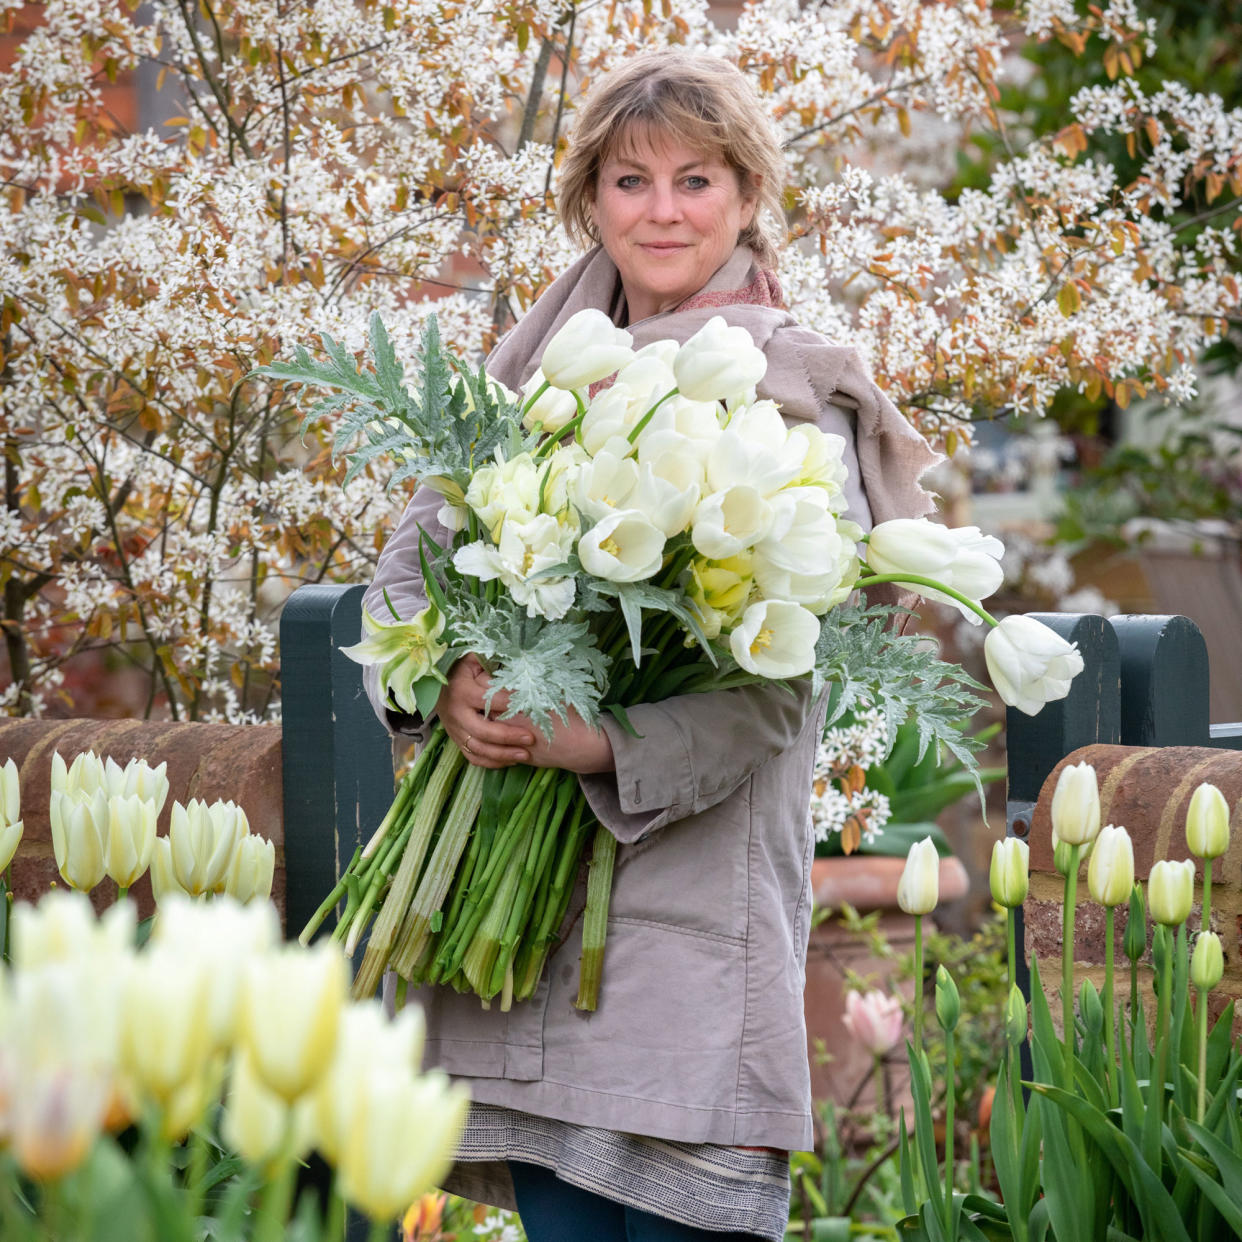  gardens expert Sarah Raven holding a large bunch of white tulips 